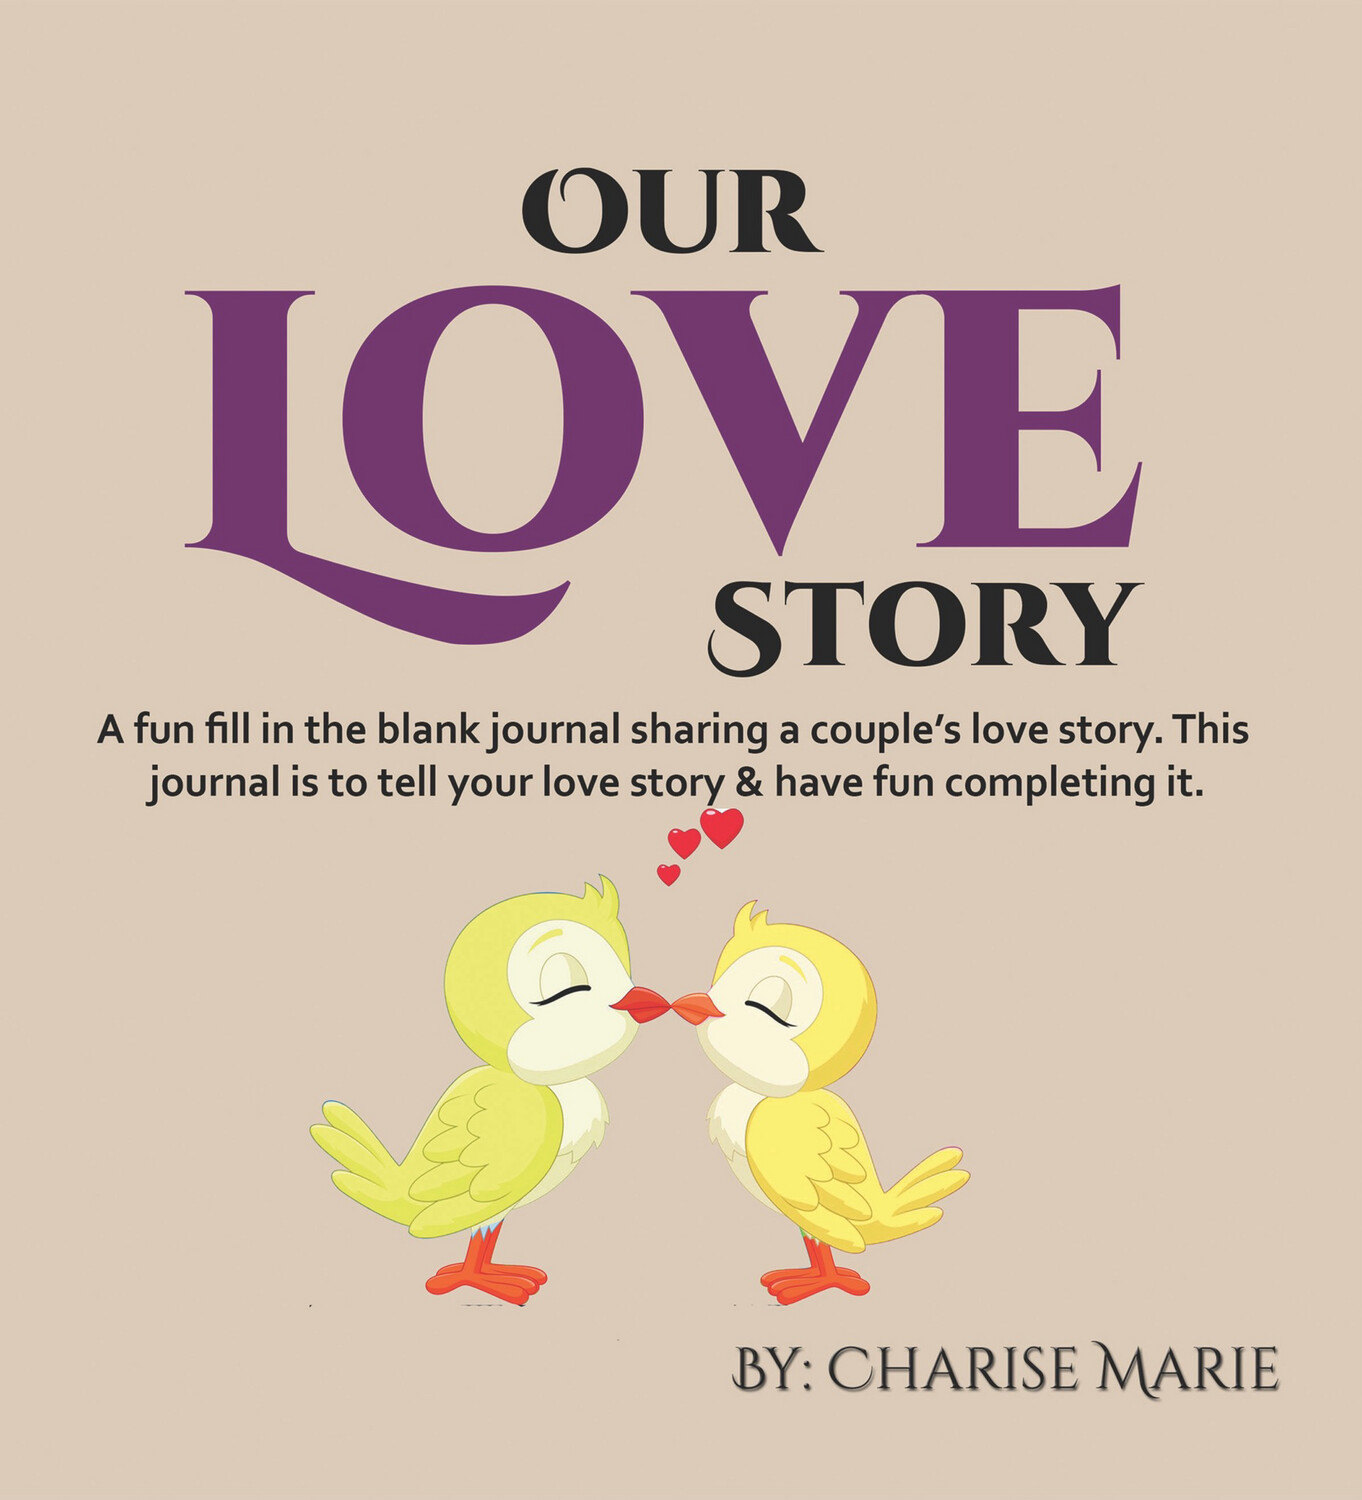 Our Love Story Journal